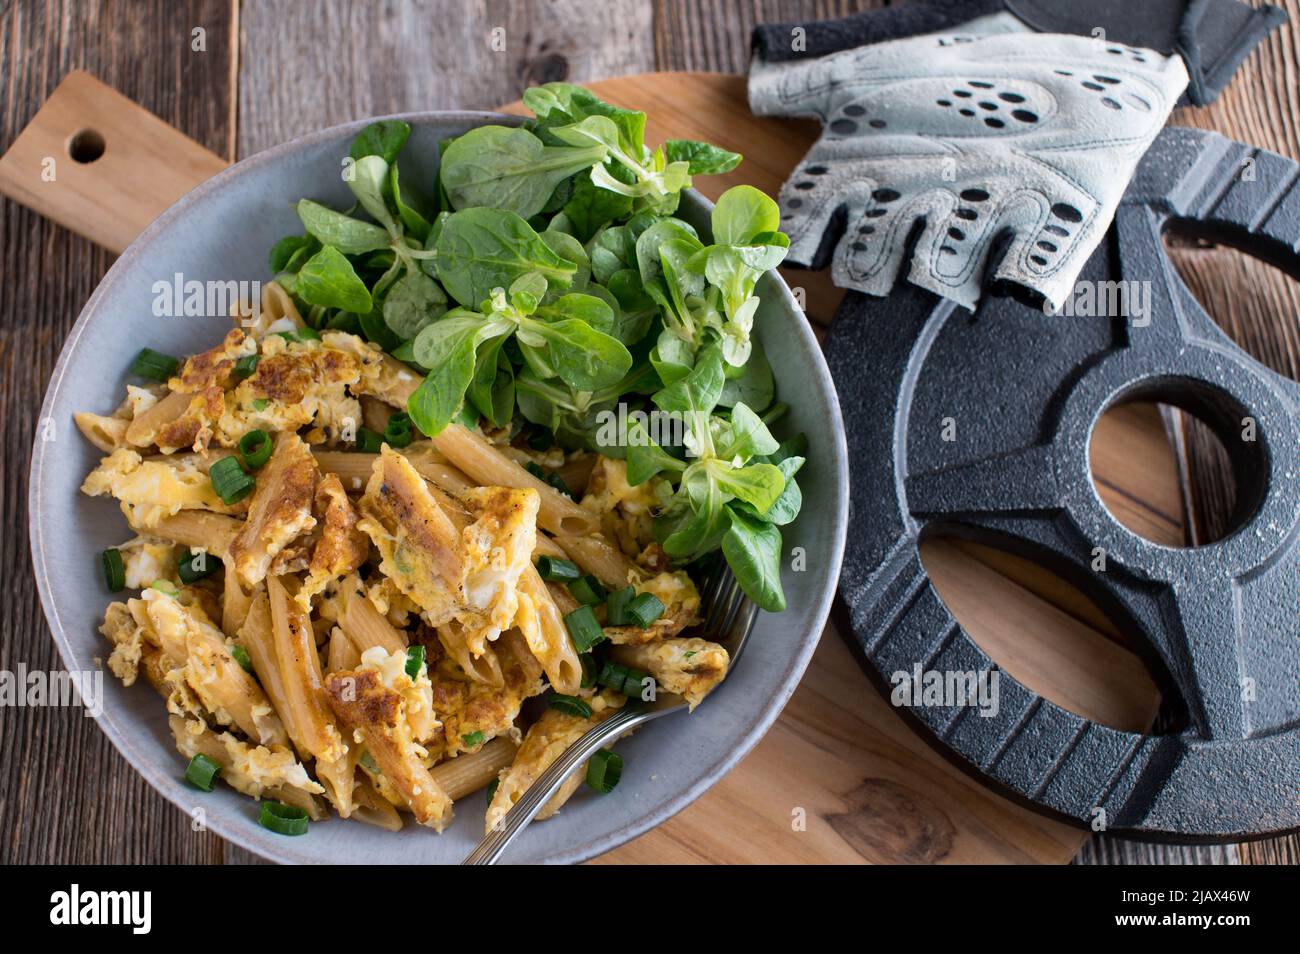 Fitness meal with pan fried whole wheat pasta and scrambled eggs. Served with a dumbbell on wooden table. Top view Stock Photo